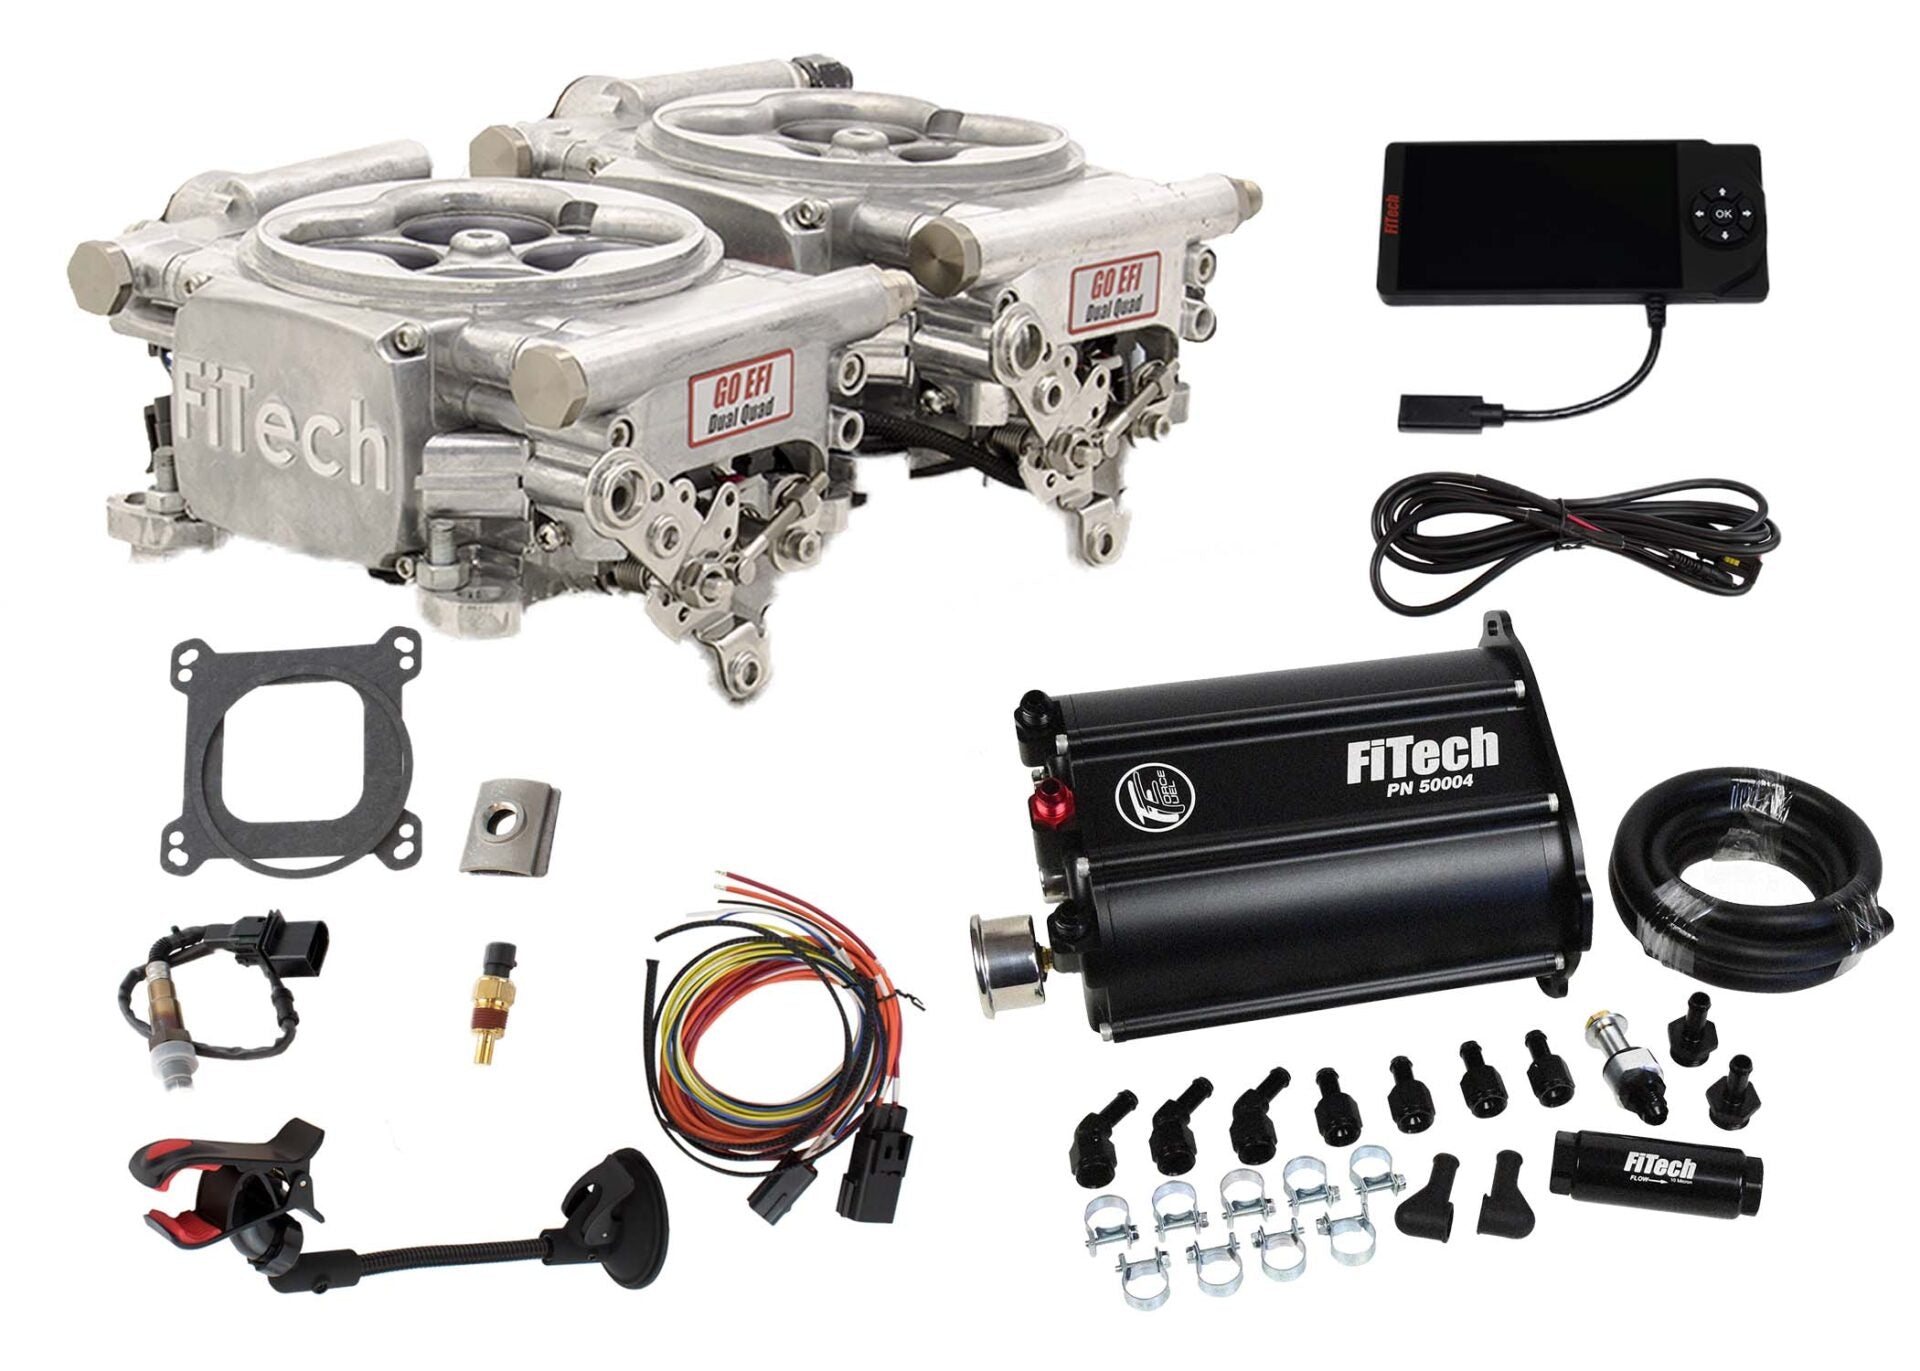 FiTech 35261 Go EFI 2x4 System Master Kit w/ Force Fuel, Fuel Delivery System